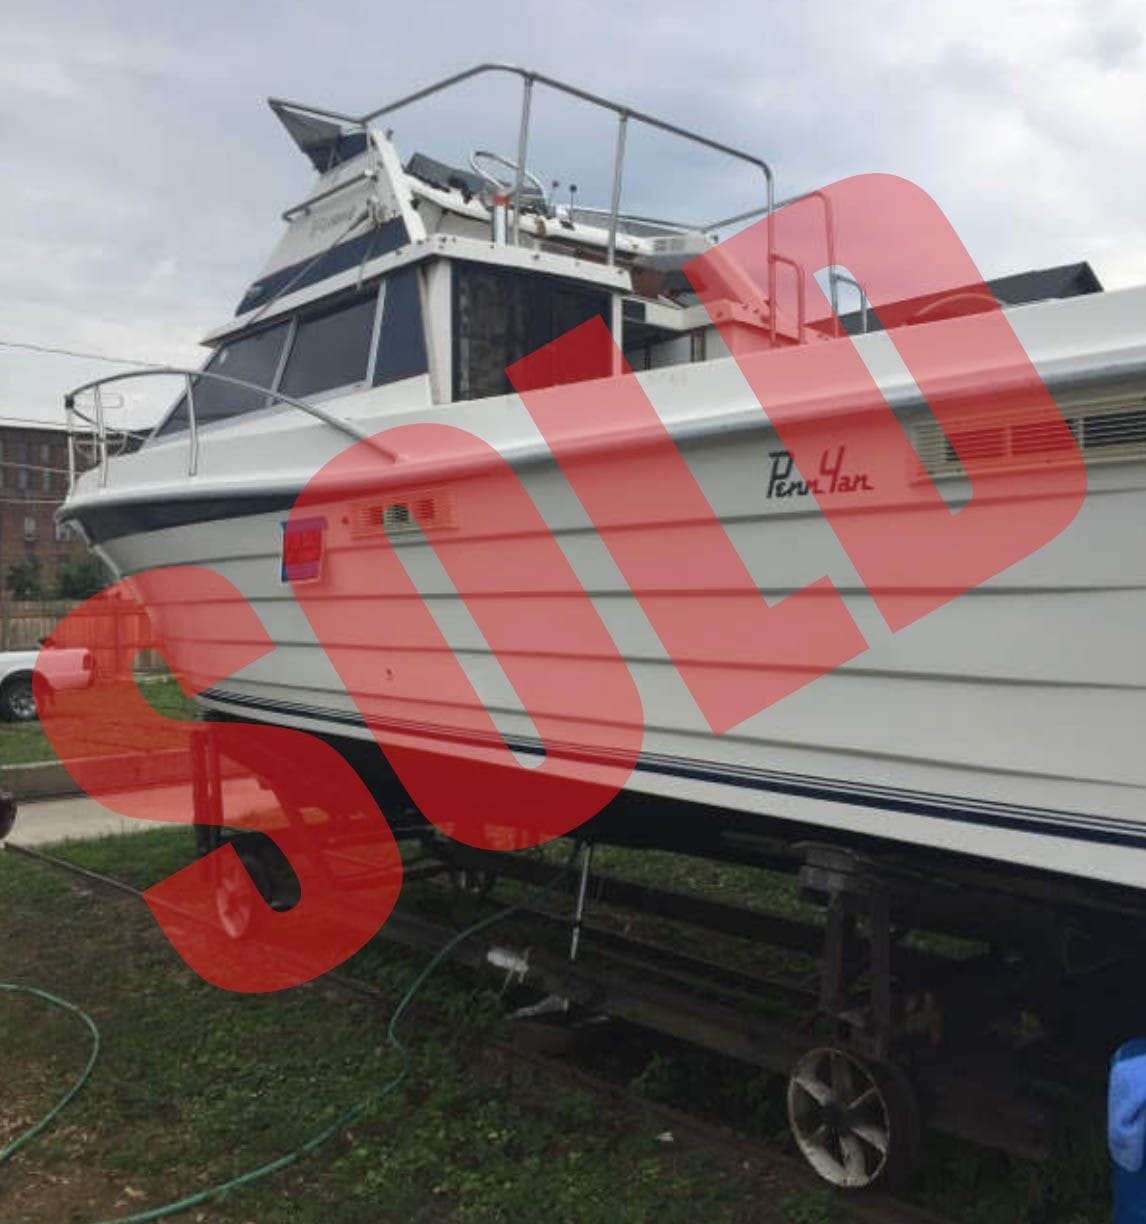 Penn Yan 255 Intruder Hardtop FULLY RIGGED READY TO FISH - Boats for Sale -  Great Lakes Fisherman - Trout, Salmon & Walleye Fishing Forum